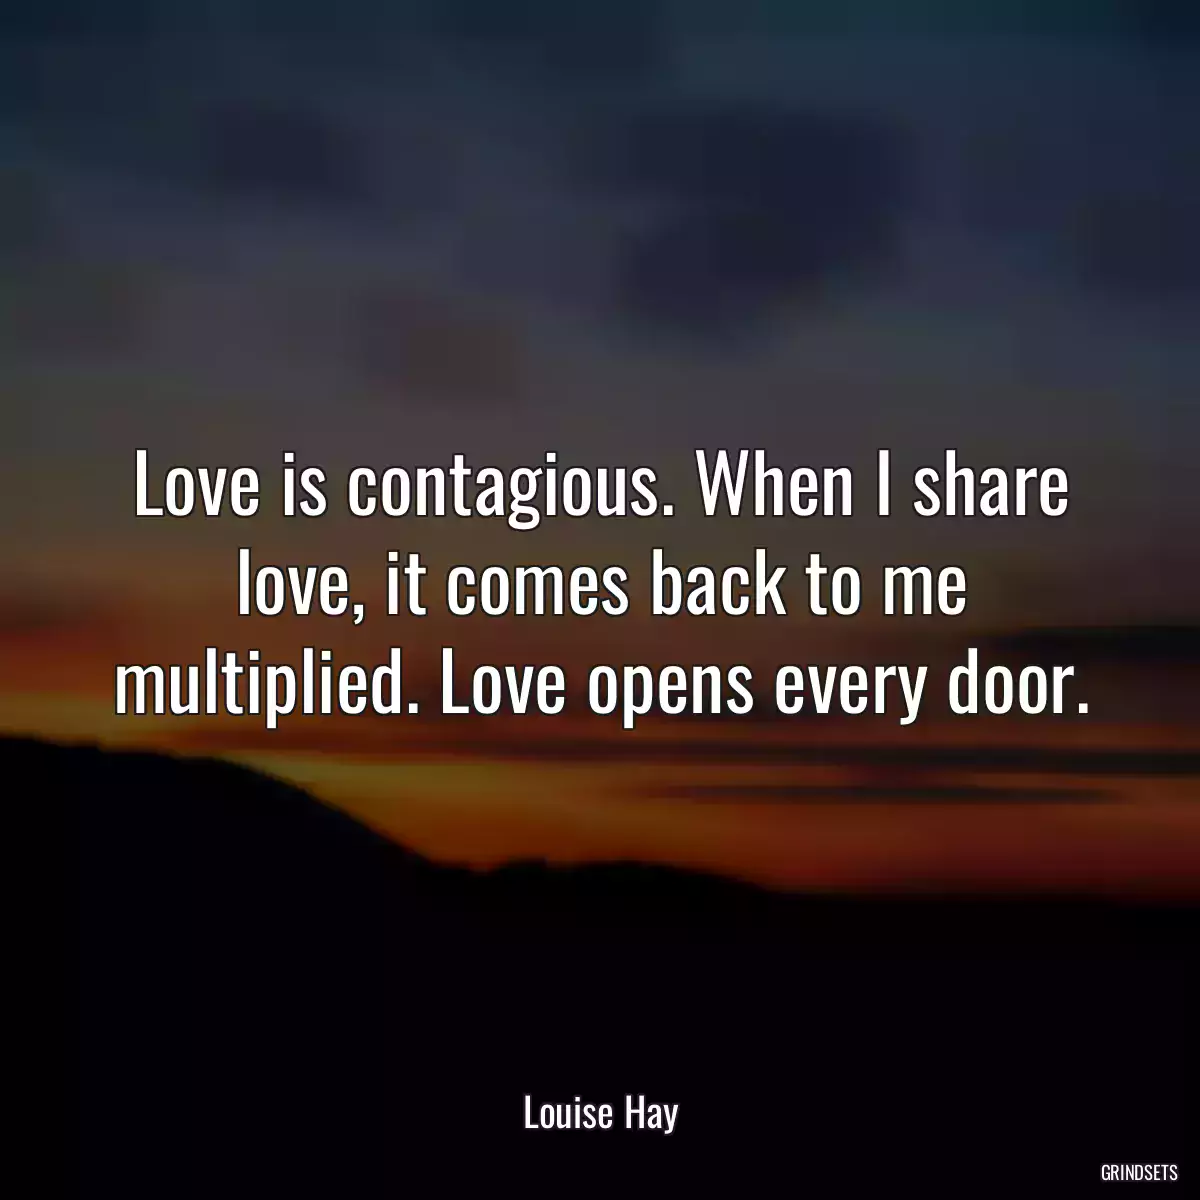 Love is contagious. When I share love, it comes back to me multiplied. Love opens every door.